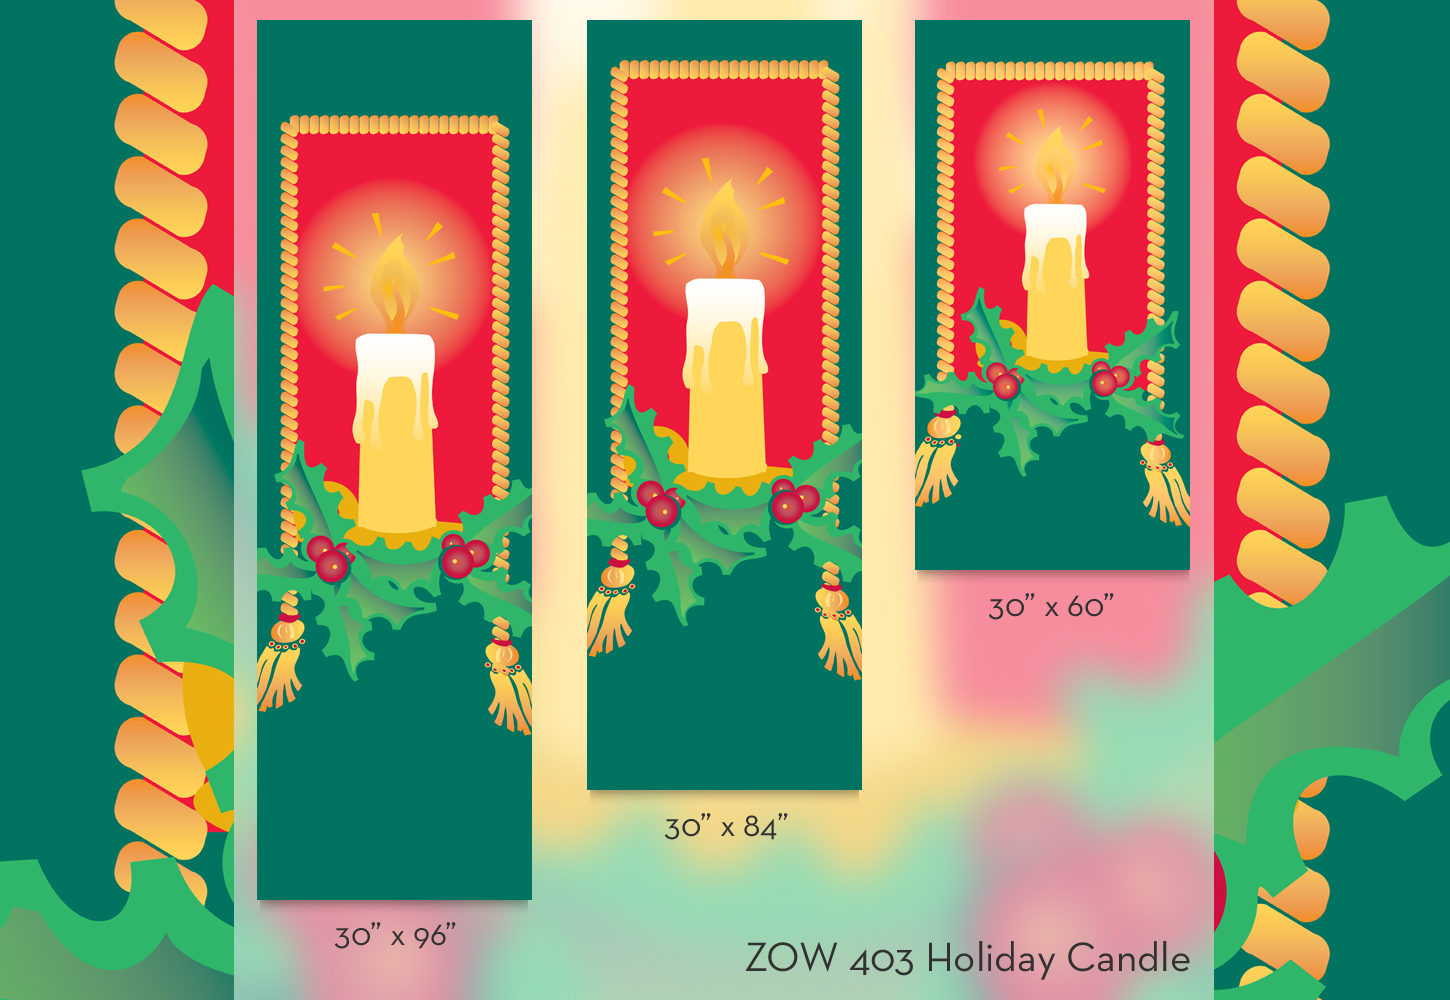 ZOW 403 Holiday Candle